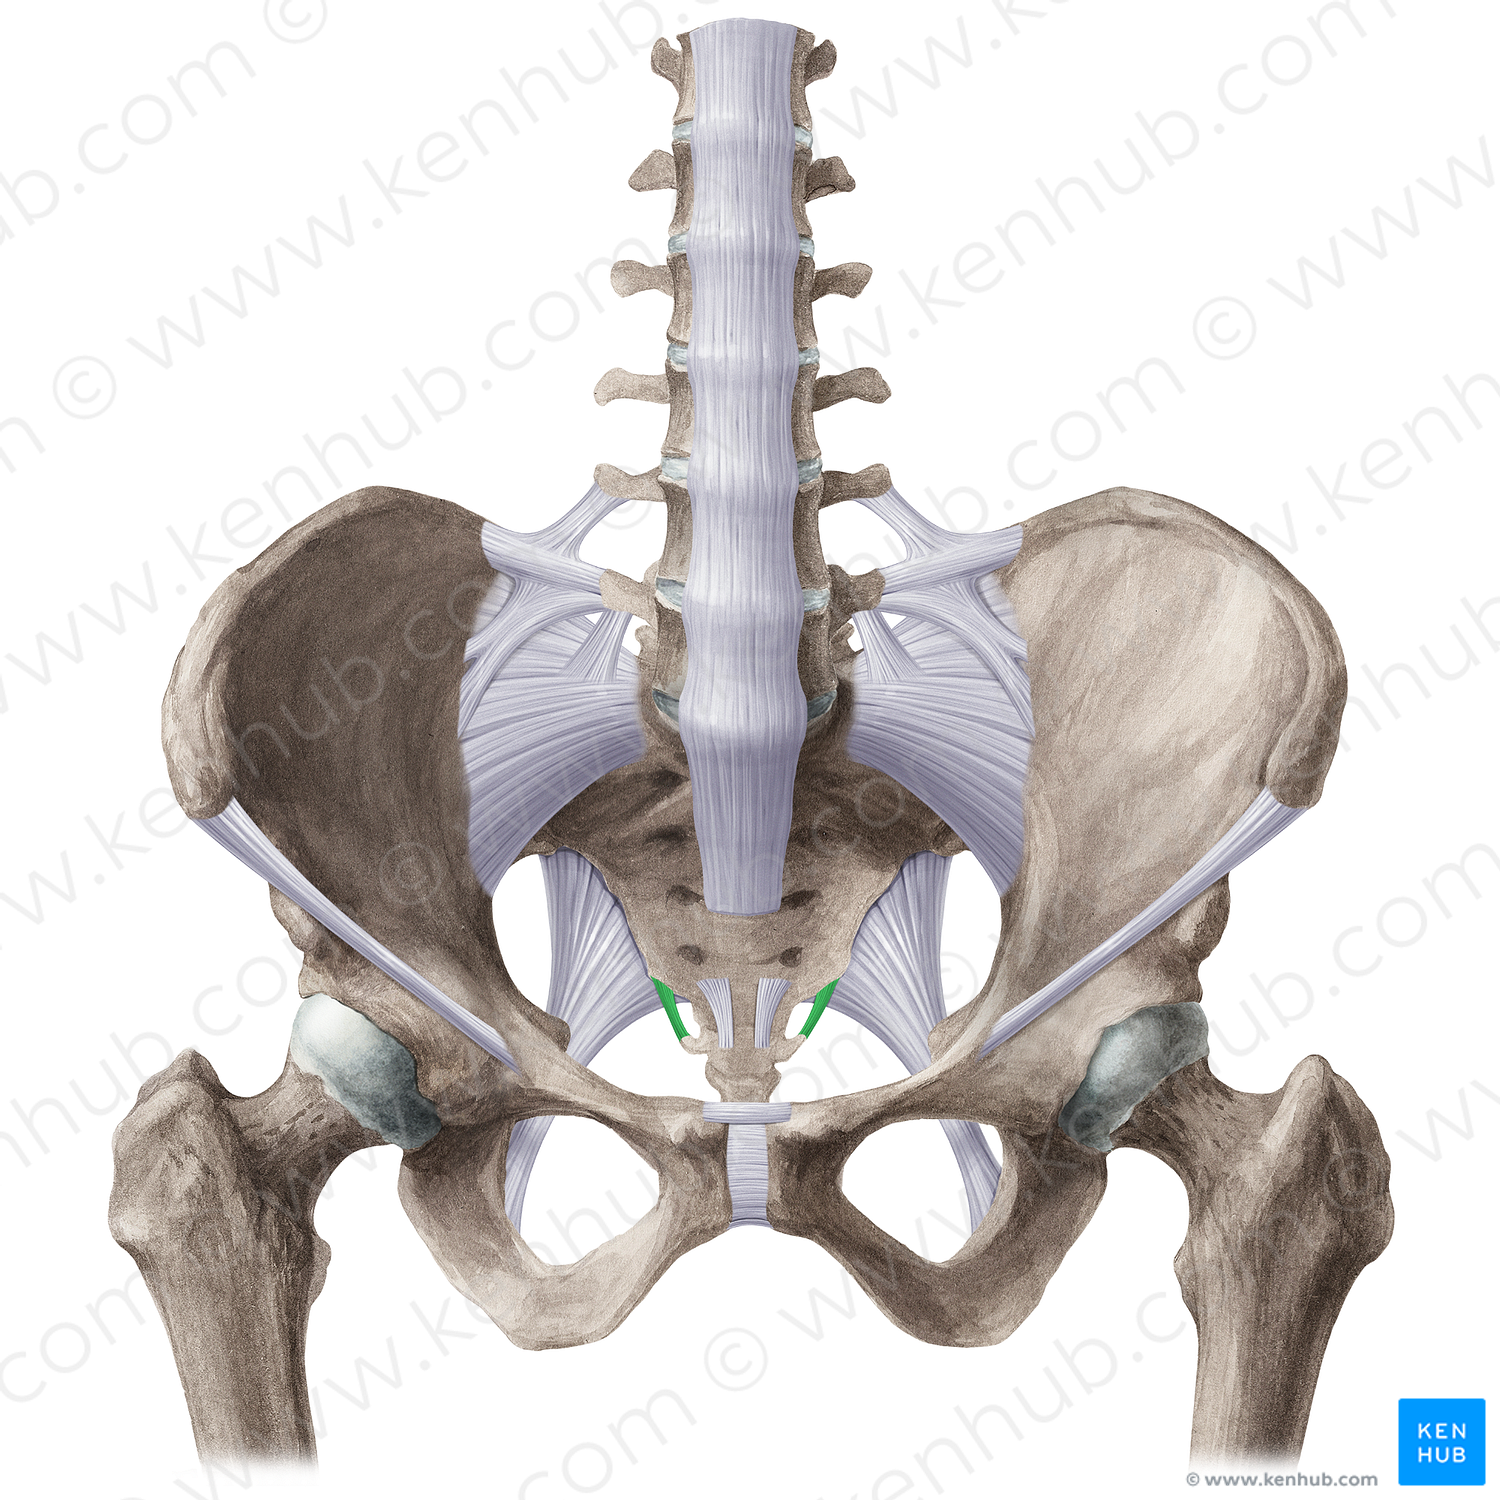 Lateral sacrococcygeal ligament (#21503)